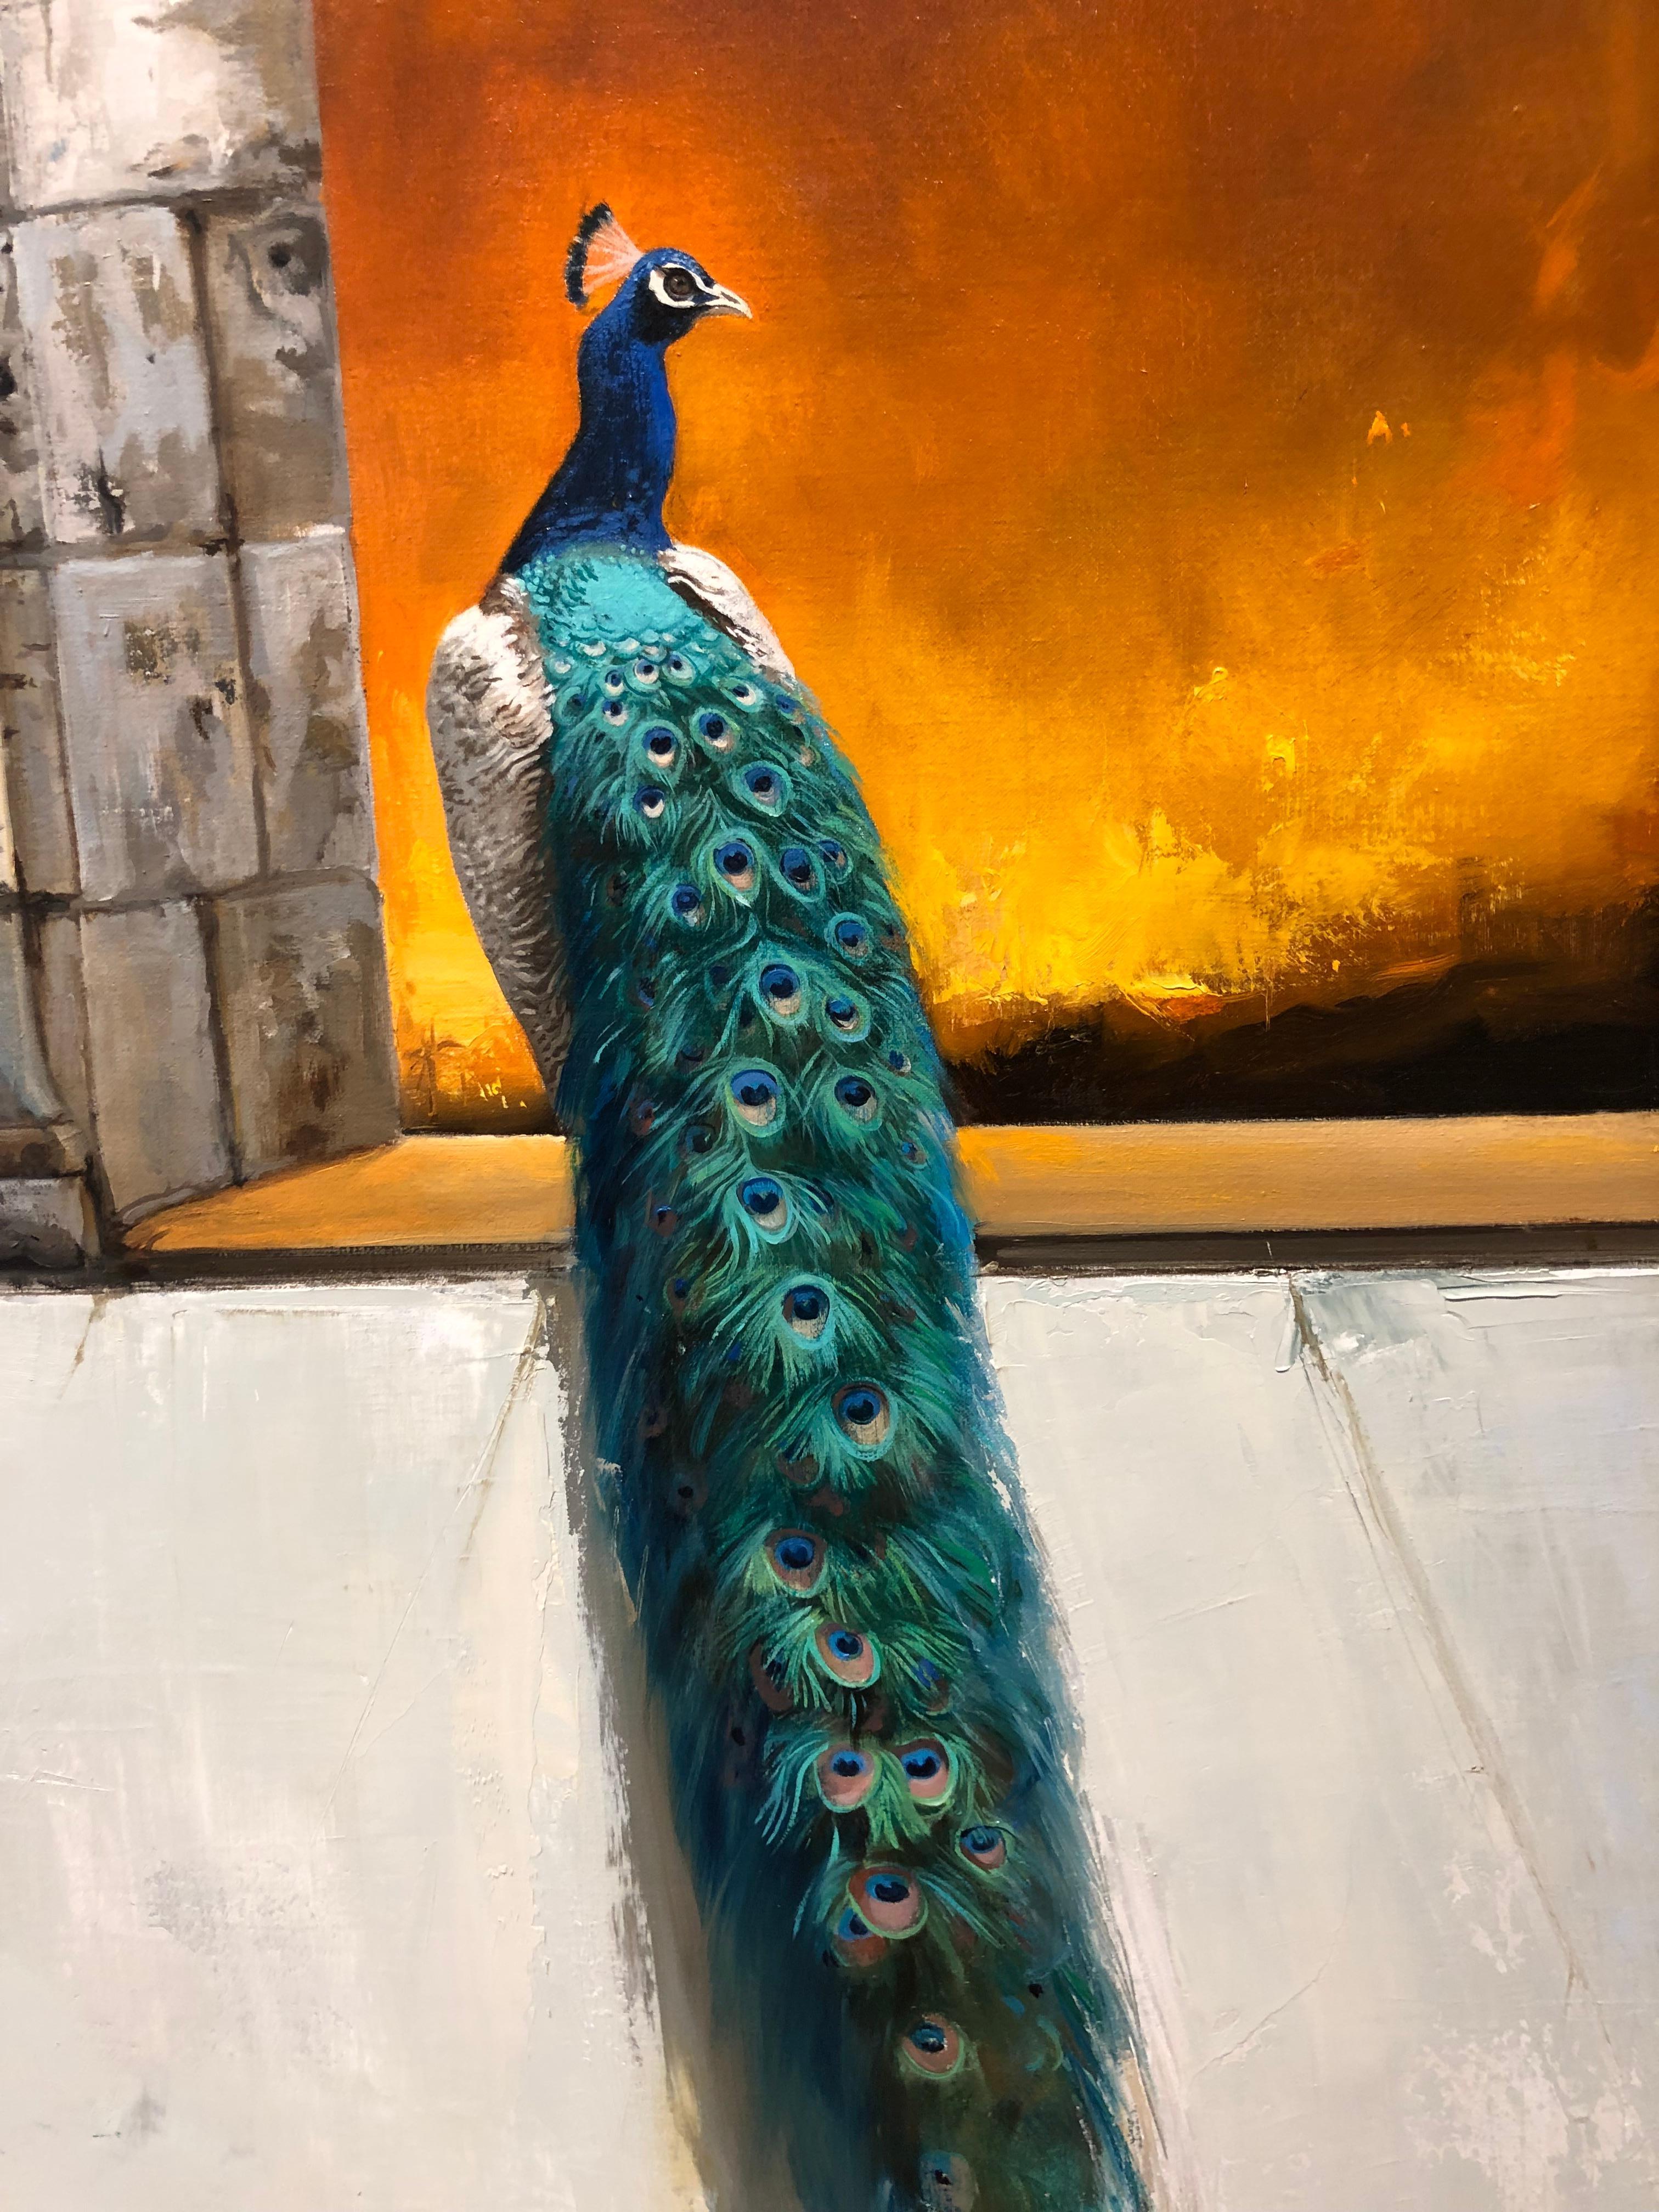 Inferno - Classic Architectural Stone Window with Peacock & Fire Scene - Painting by Carol Pylant